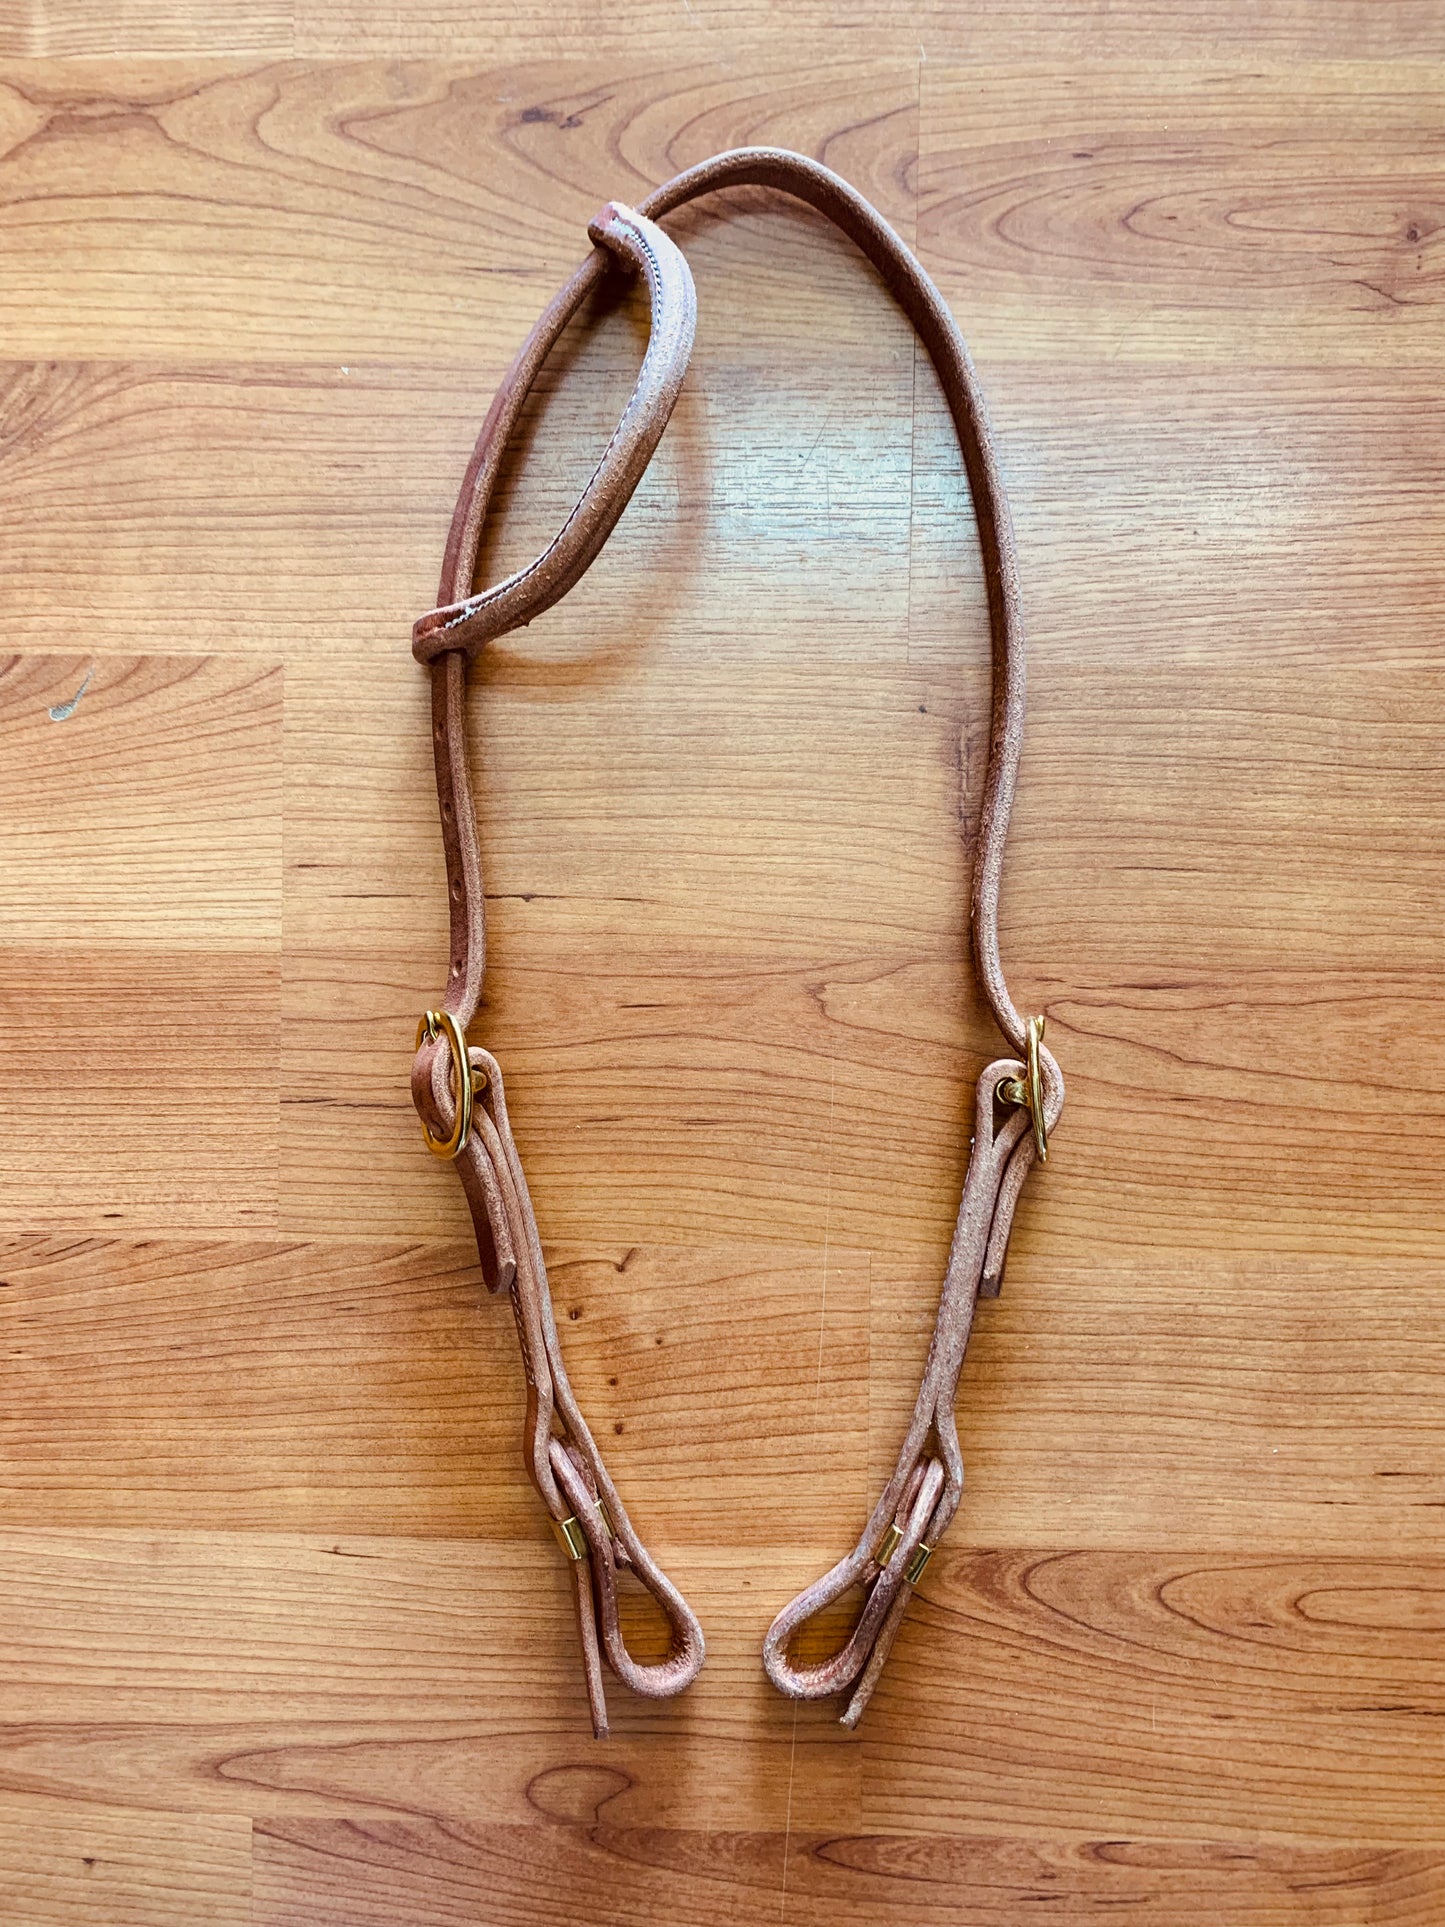 Harness Leather Quick Change One Eared Bridle